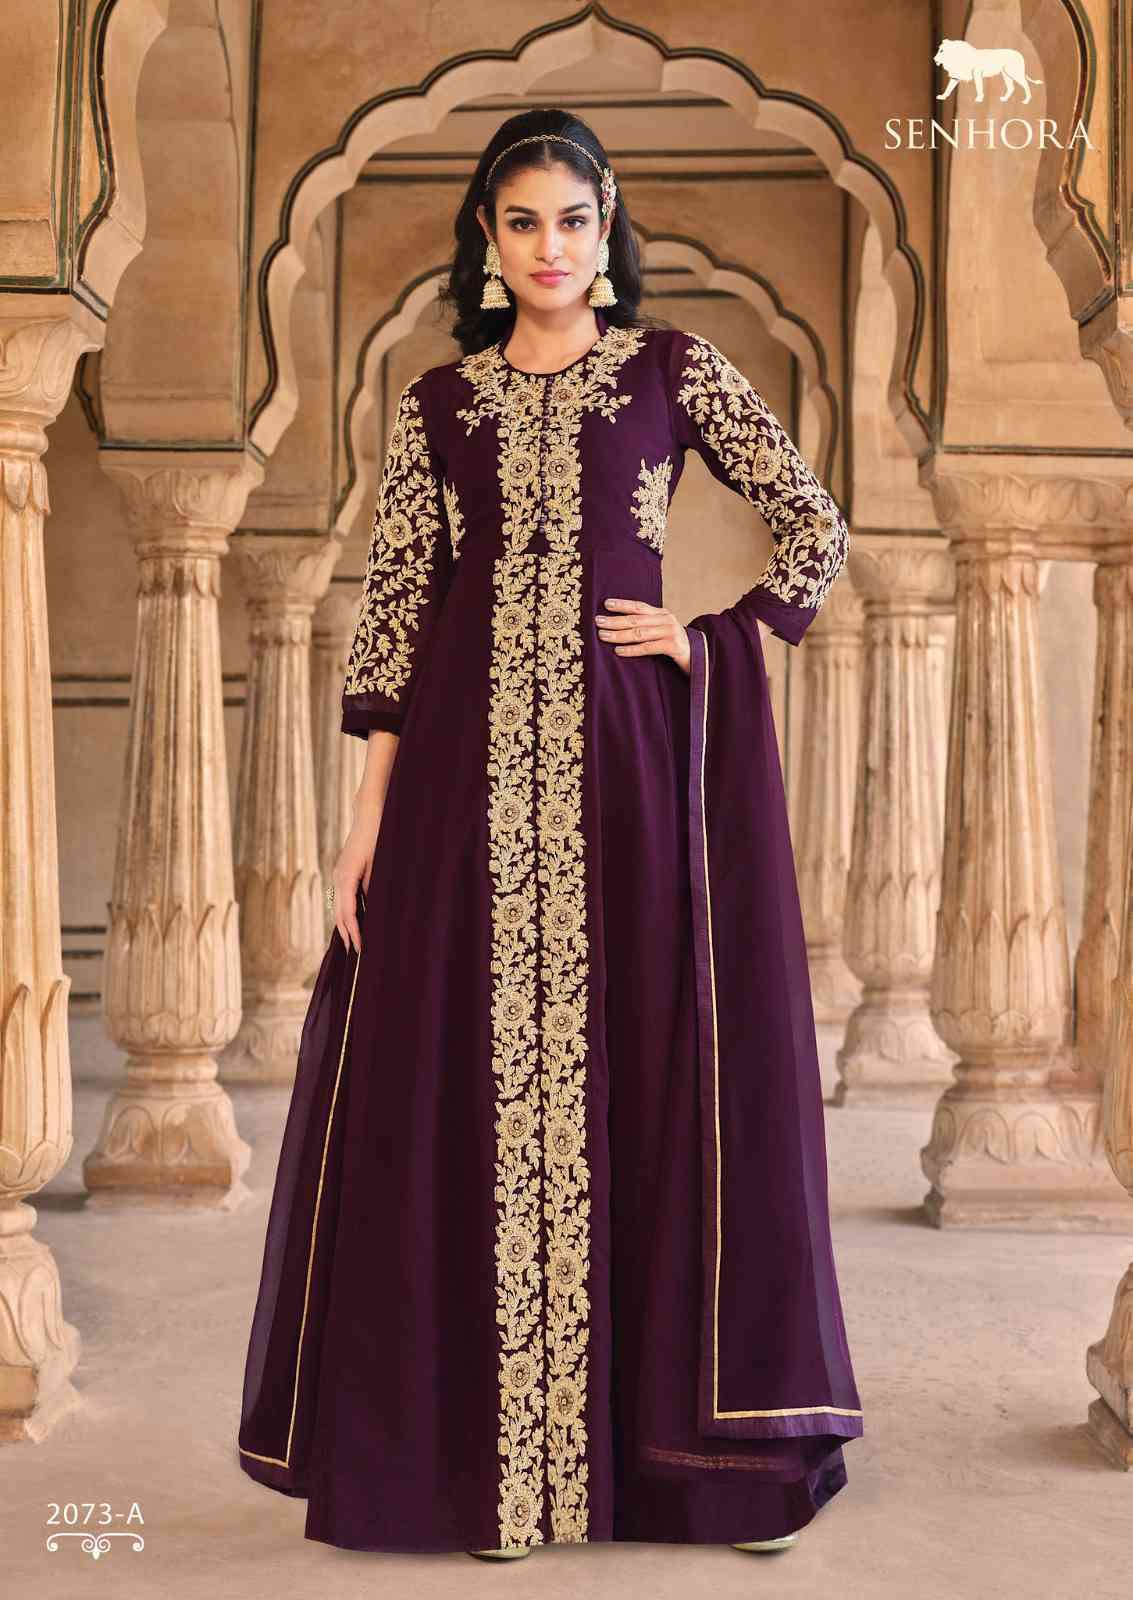 Wedding - Abaya Style - Collection of Indian Dresses, Accessories &  Clothing in Ethnic Fashion